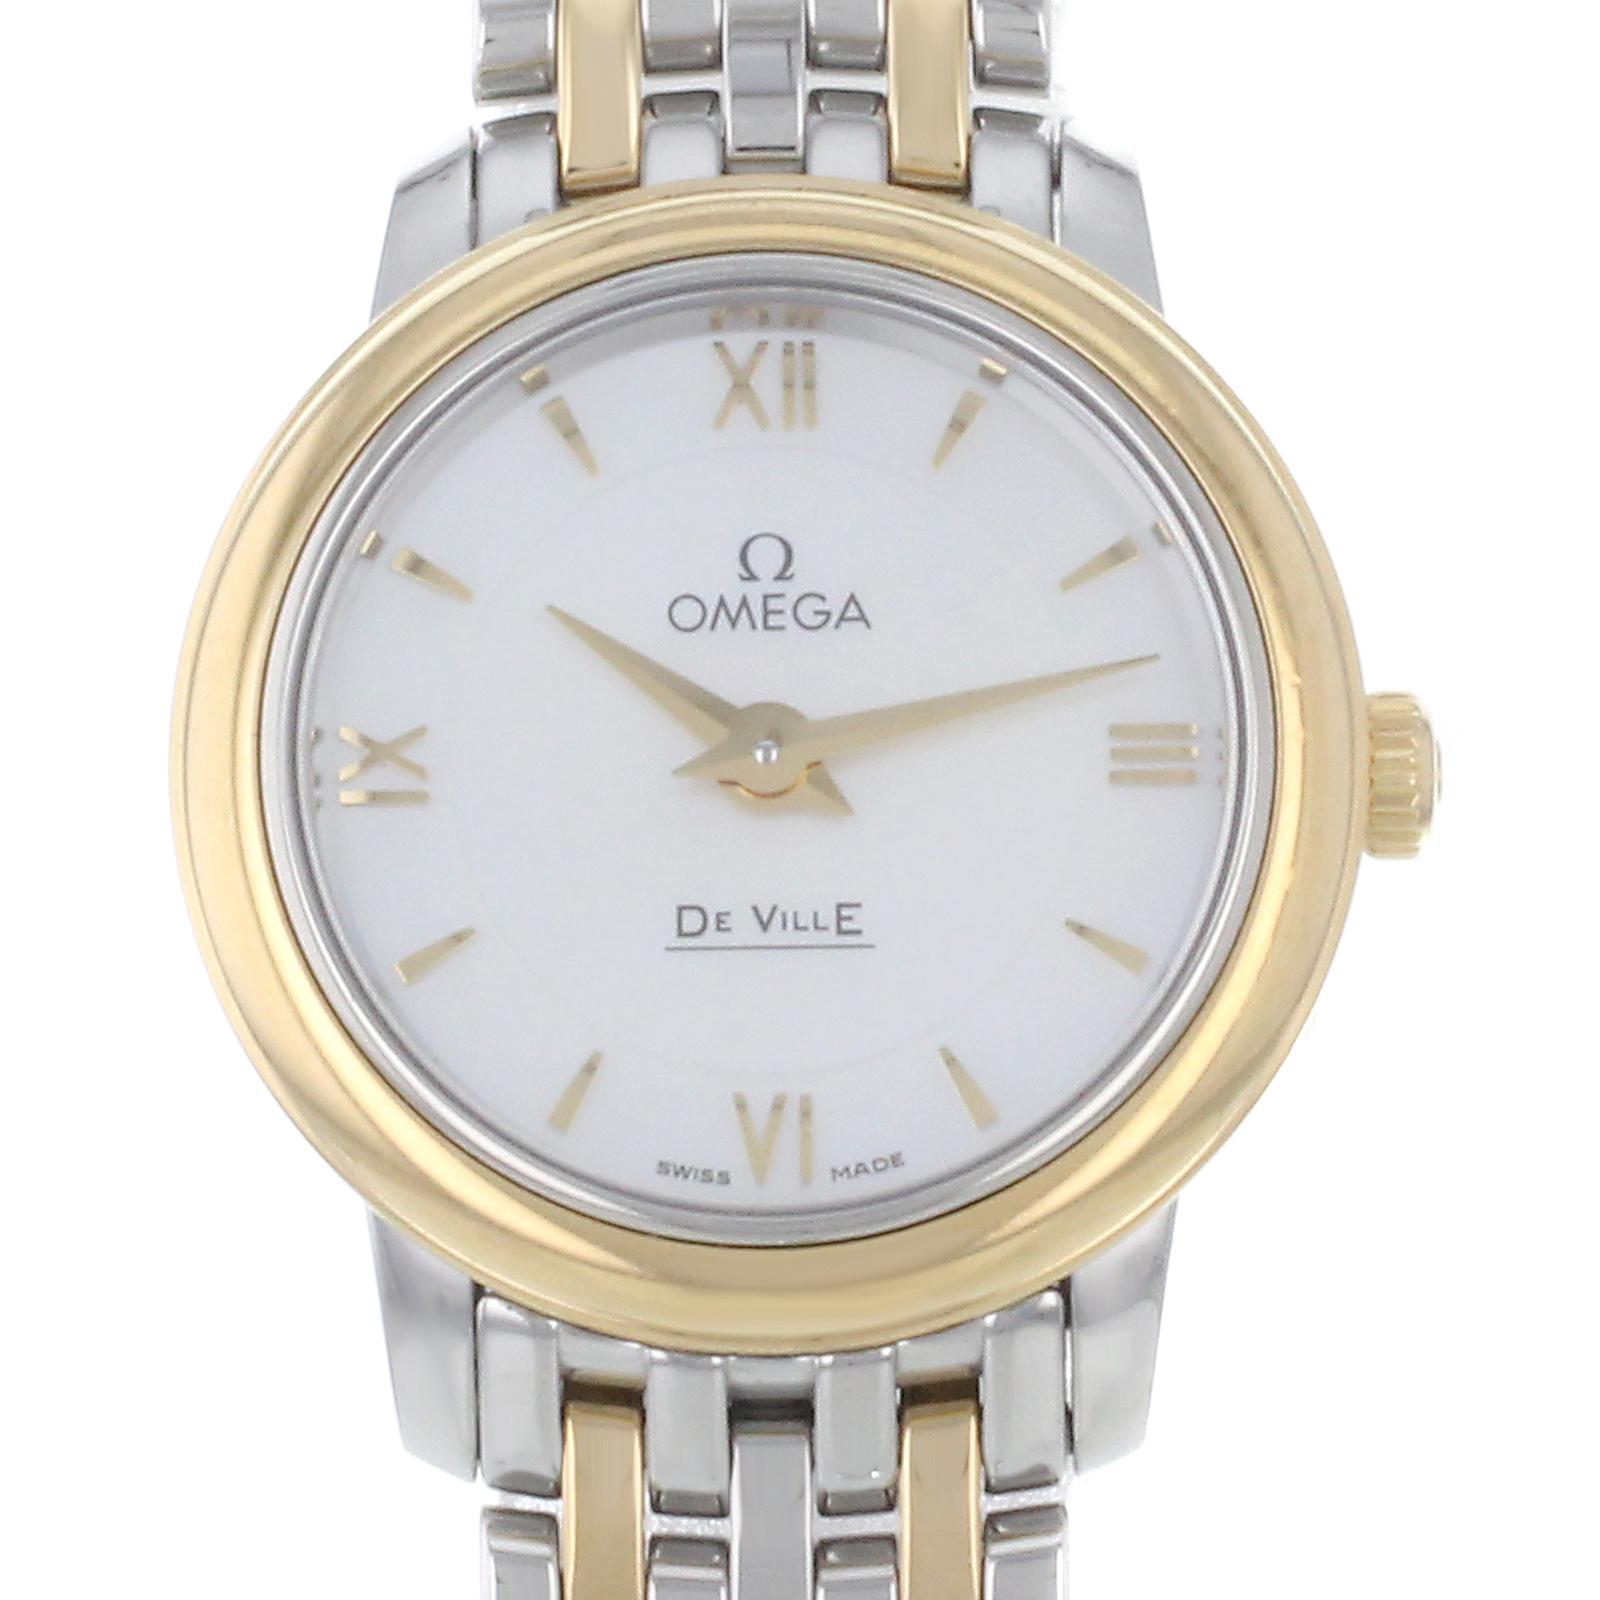 This display model Omega DeVille  424.20.24.60.05.001 is a beautiful Ladies timepiece that is powered by a quartz movement which is cased in a stainless & solid gold case. It has a round shape face, no features dial and has hand roman numerals,